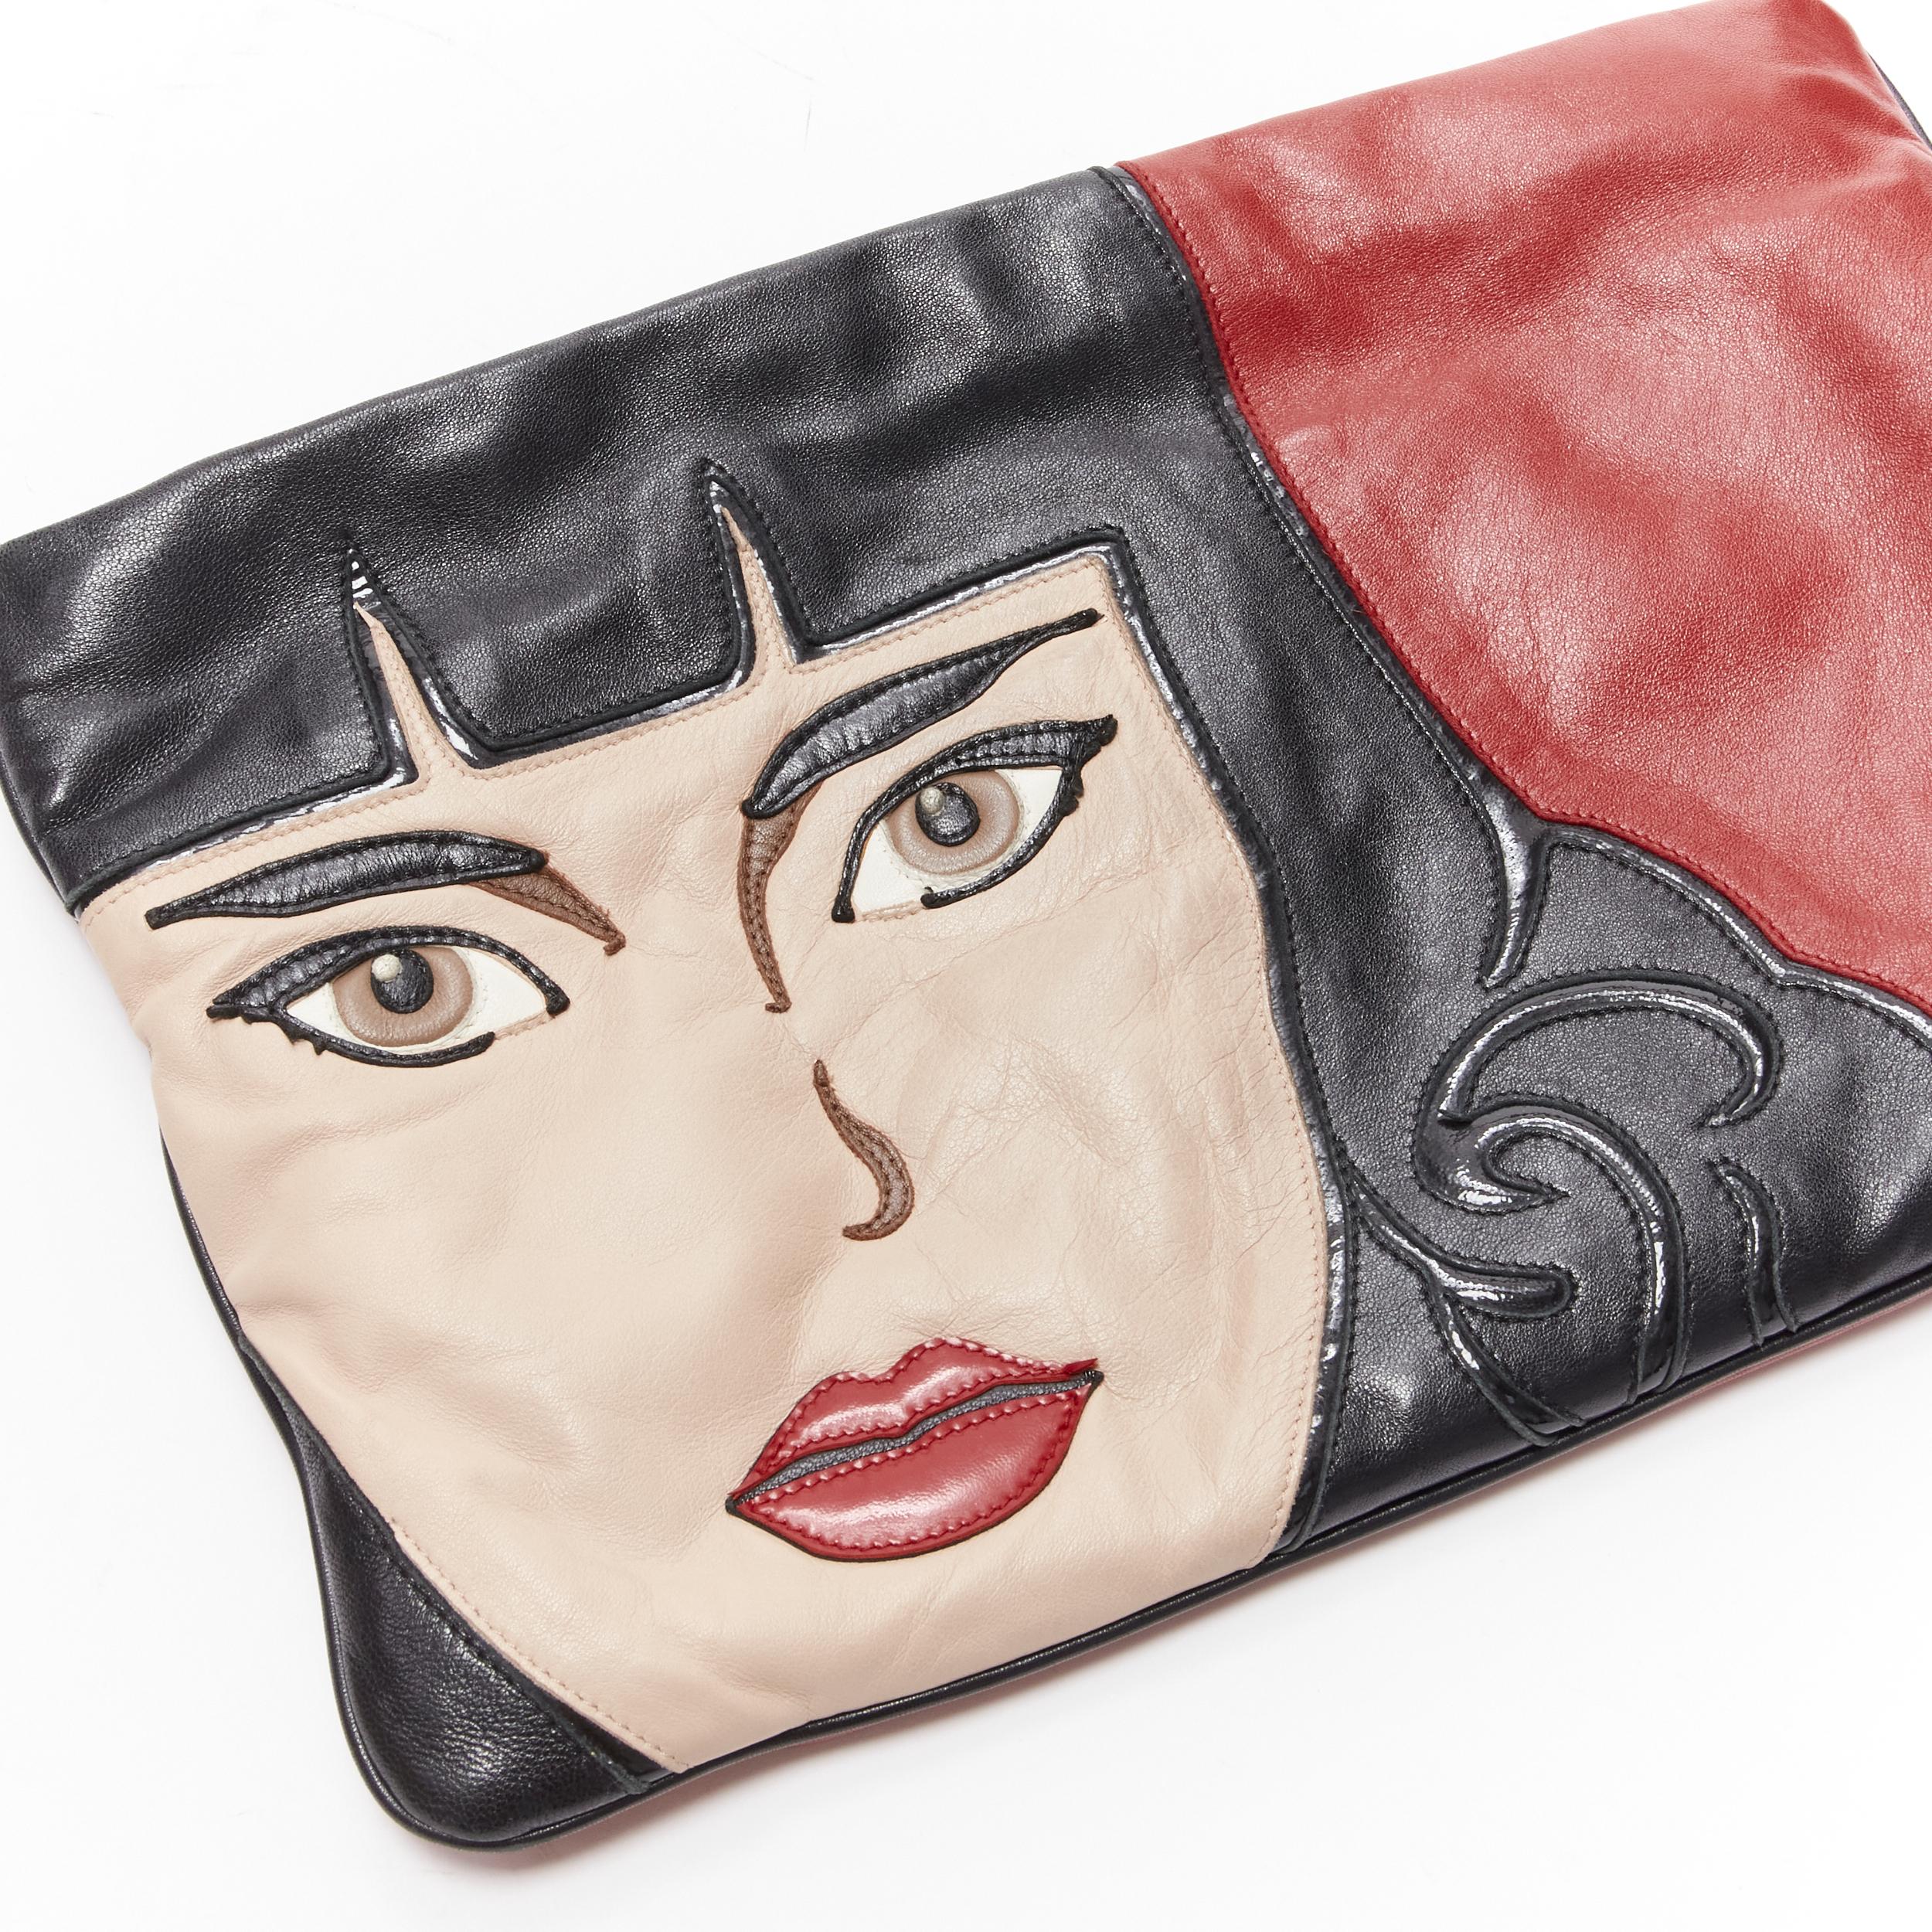 PRADA 2014 Limited Edition pop girl face black red leather oversized clutch bag 1